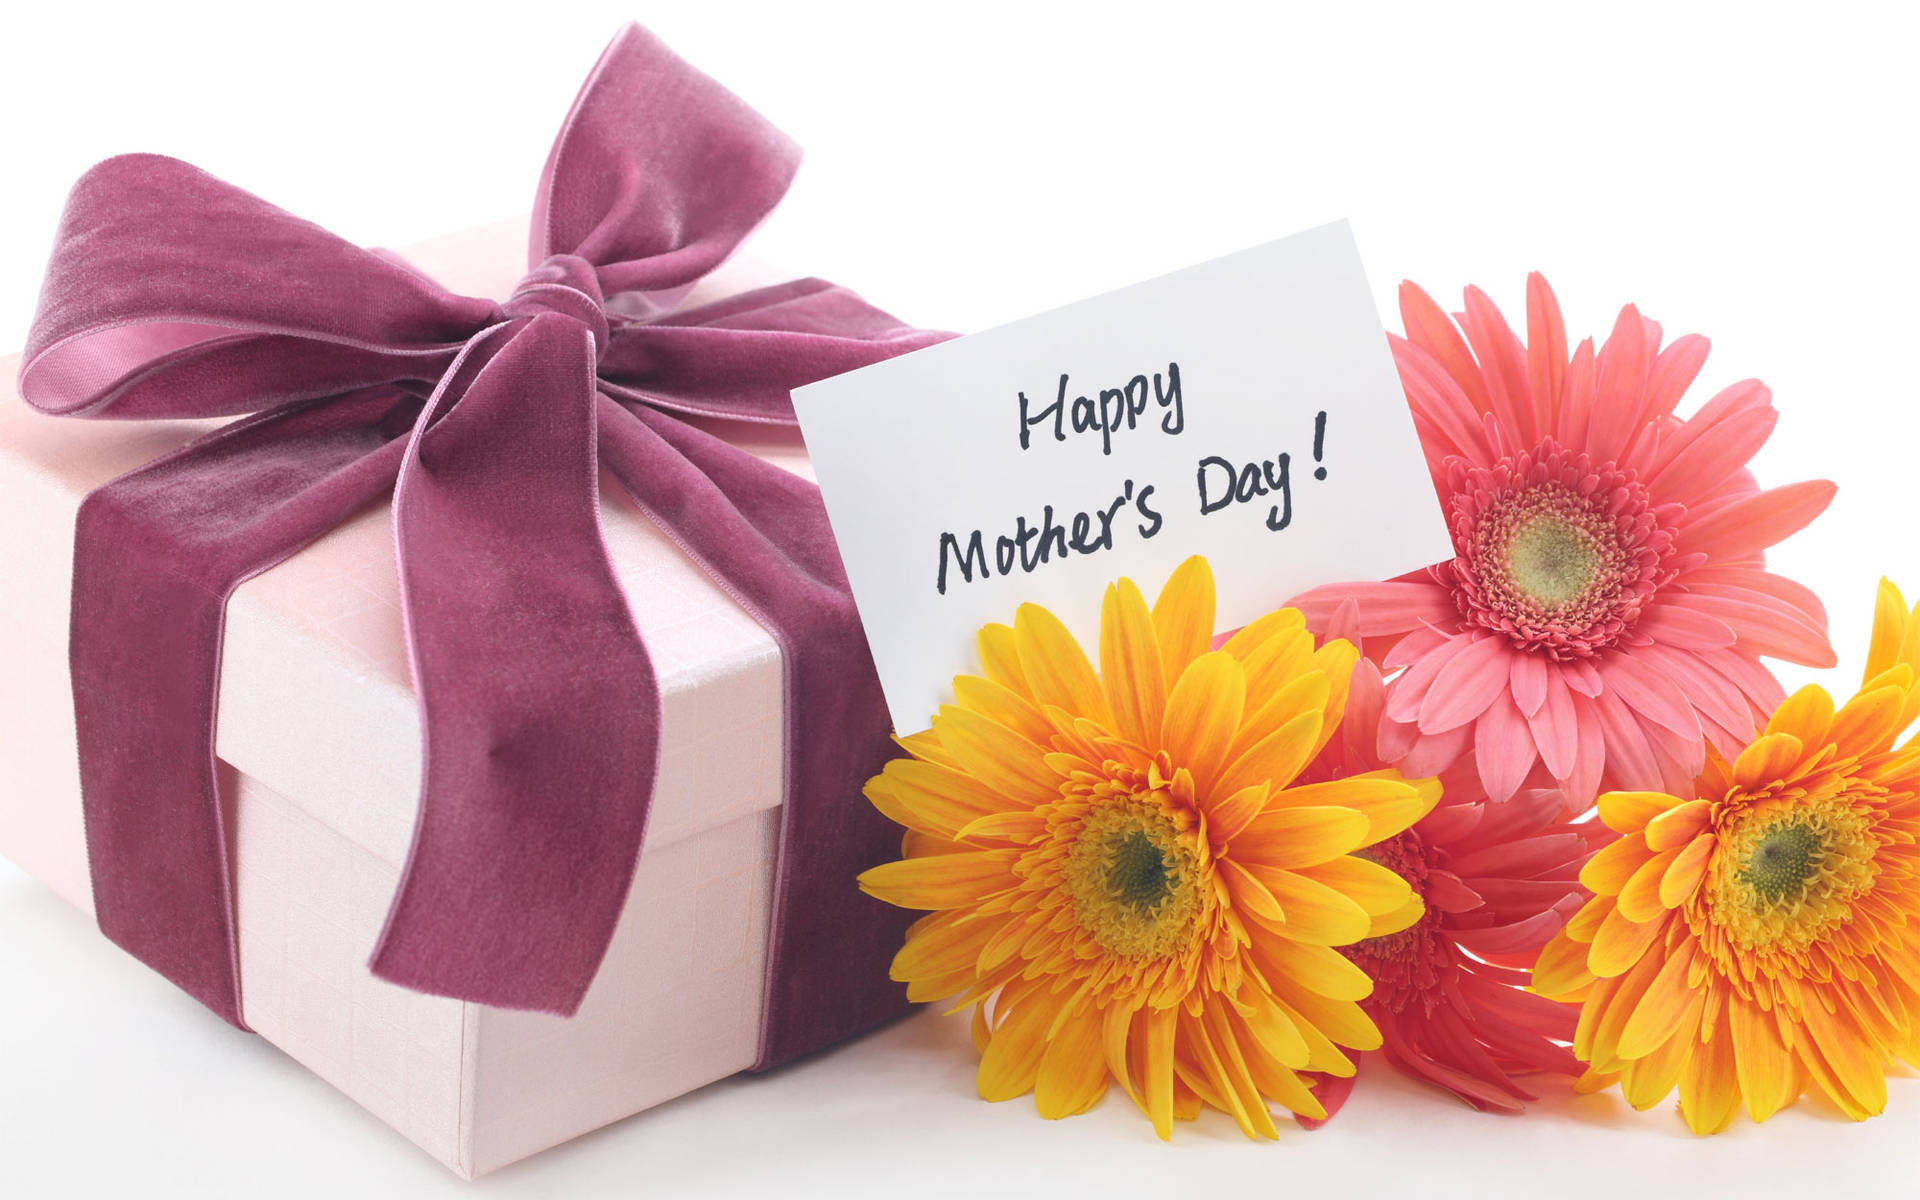 Happy Mothers Day With Sunflowers Background